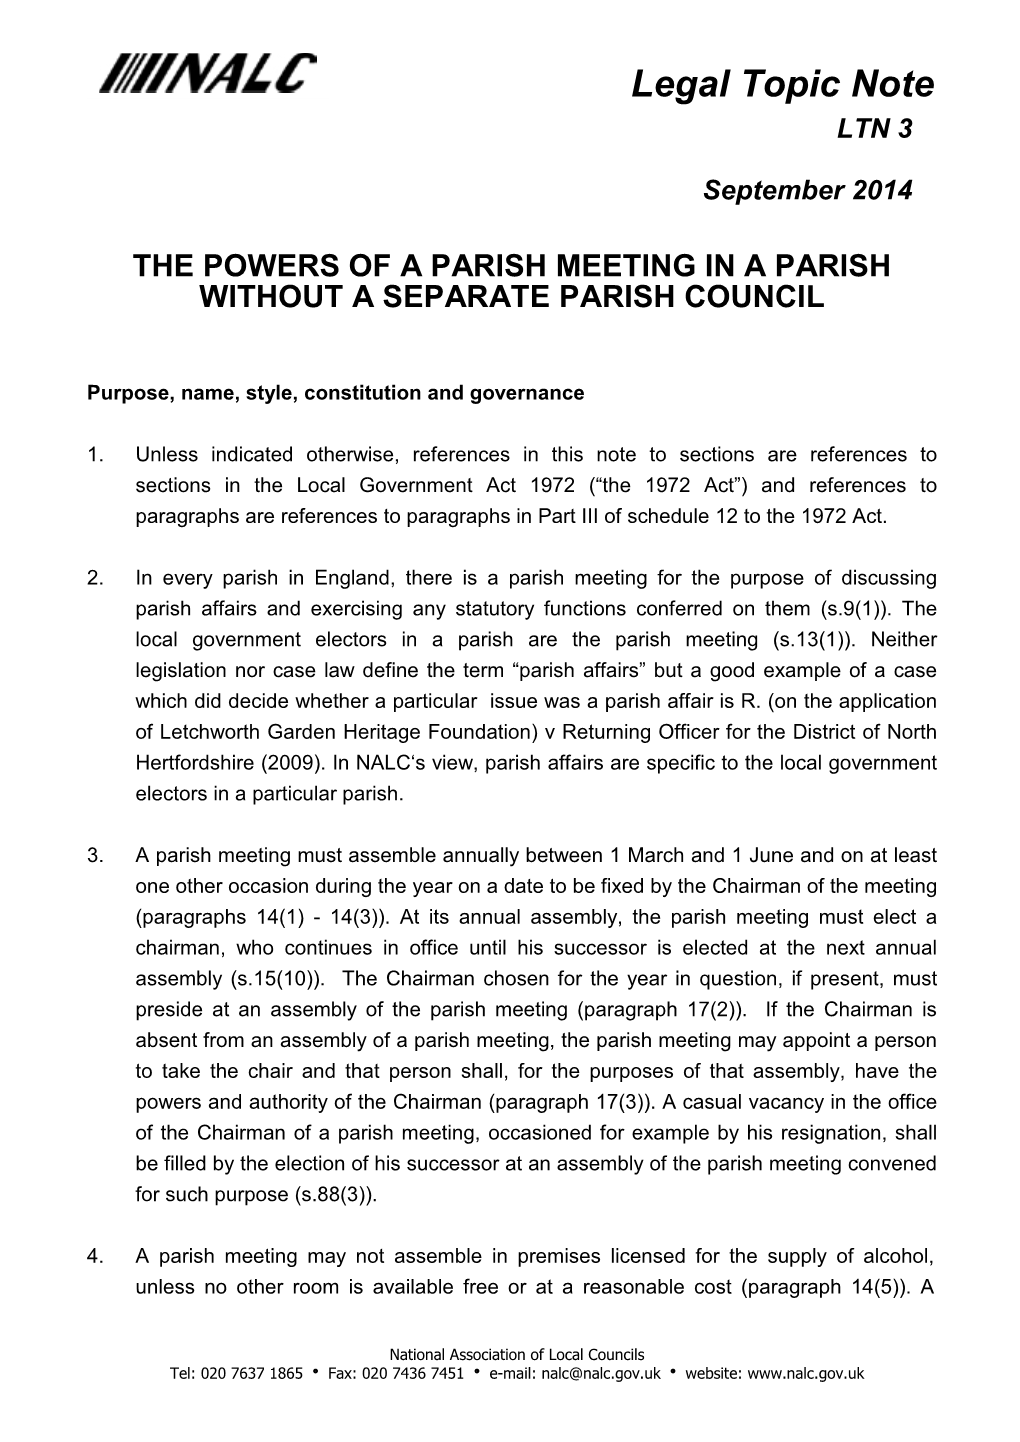 The Powers of a Parish Meeting in a Parish Without a Separate Parish Council